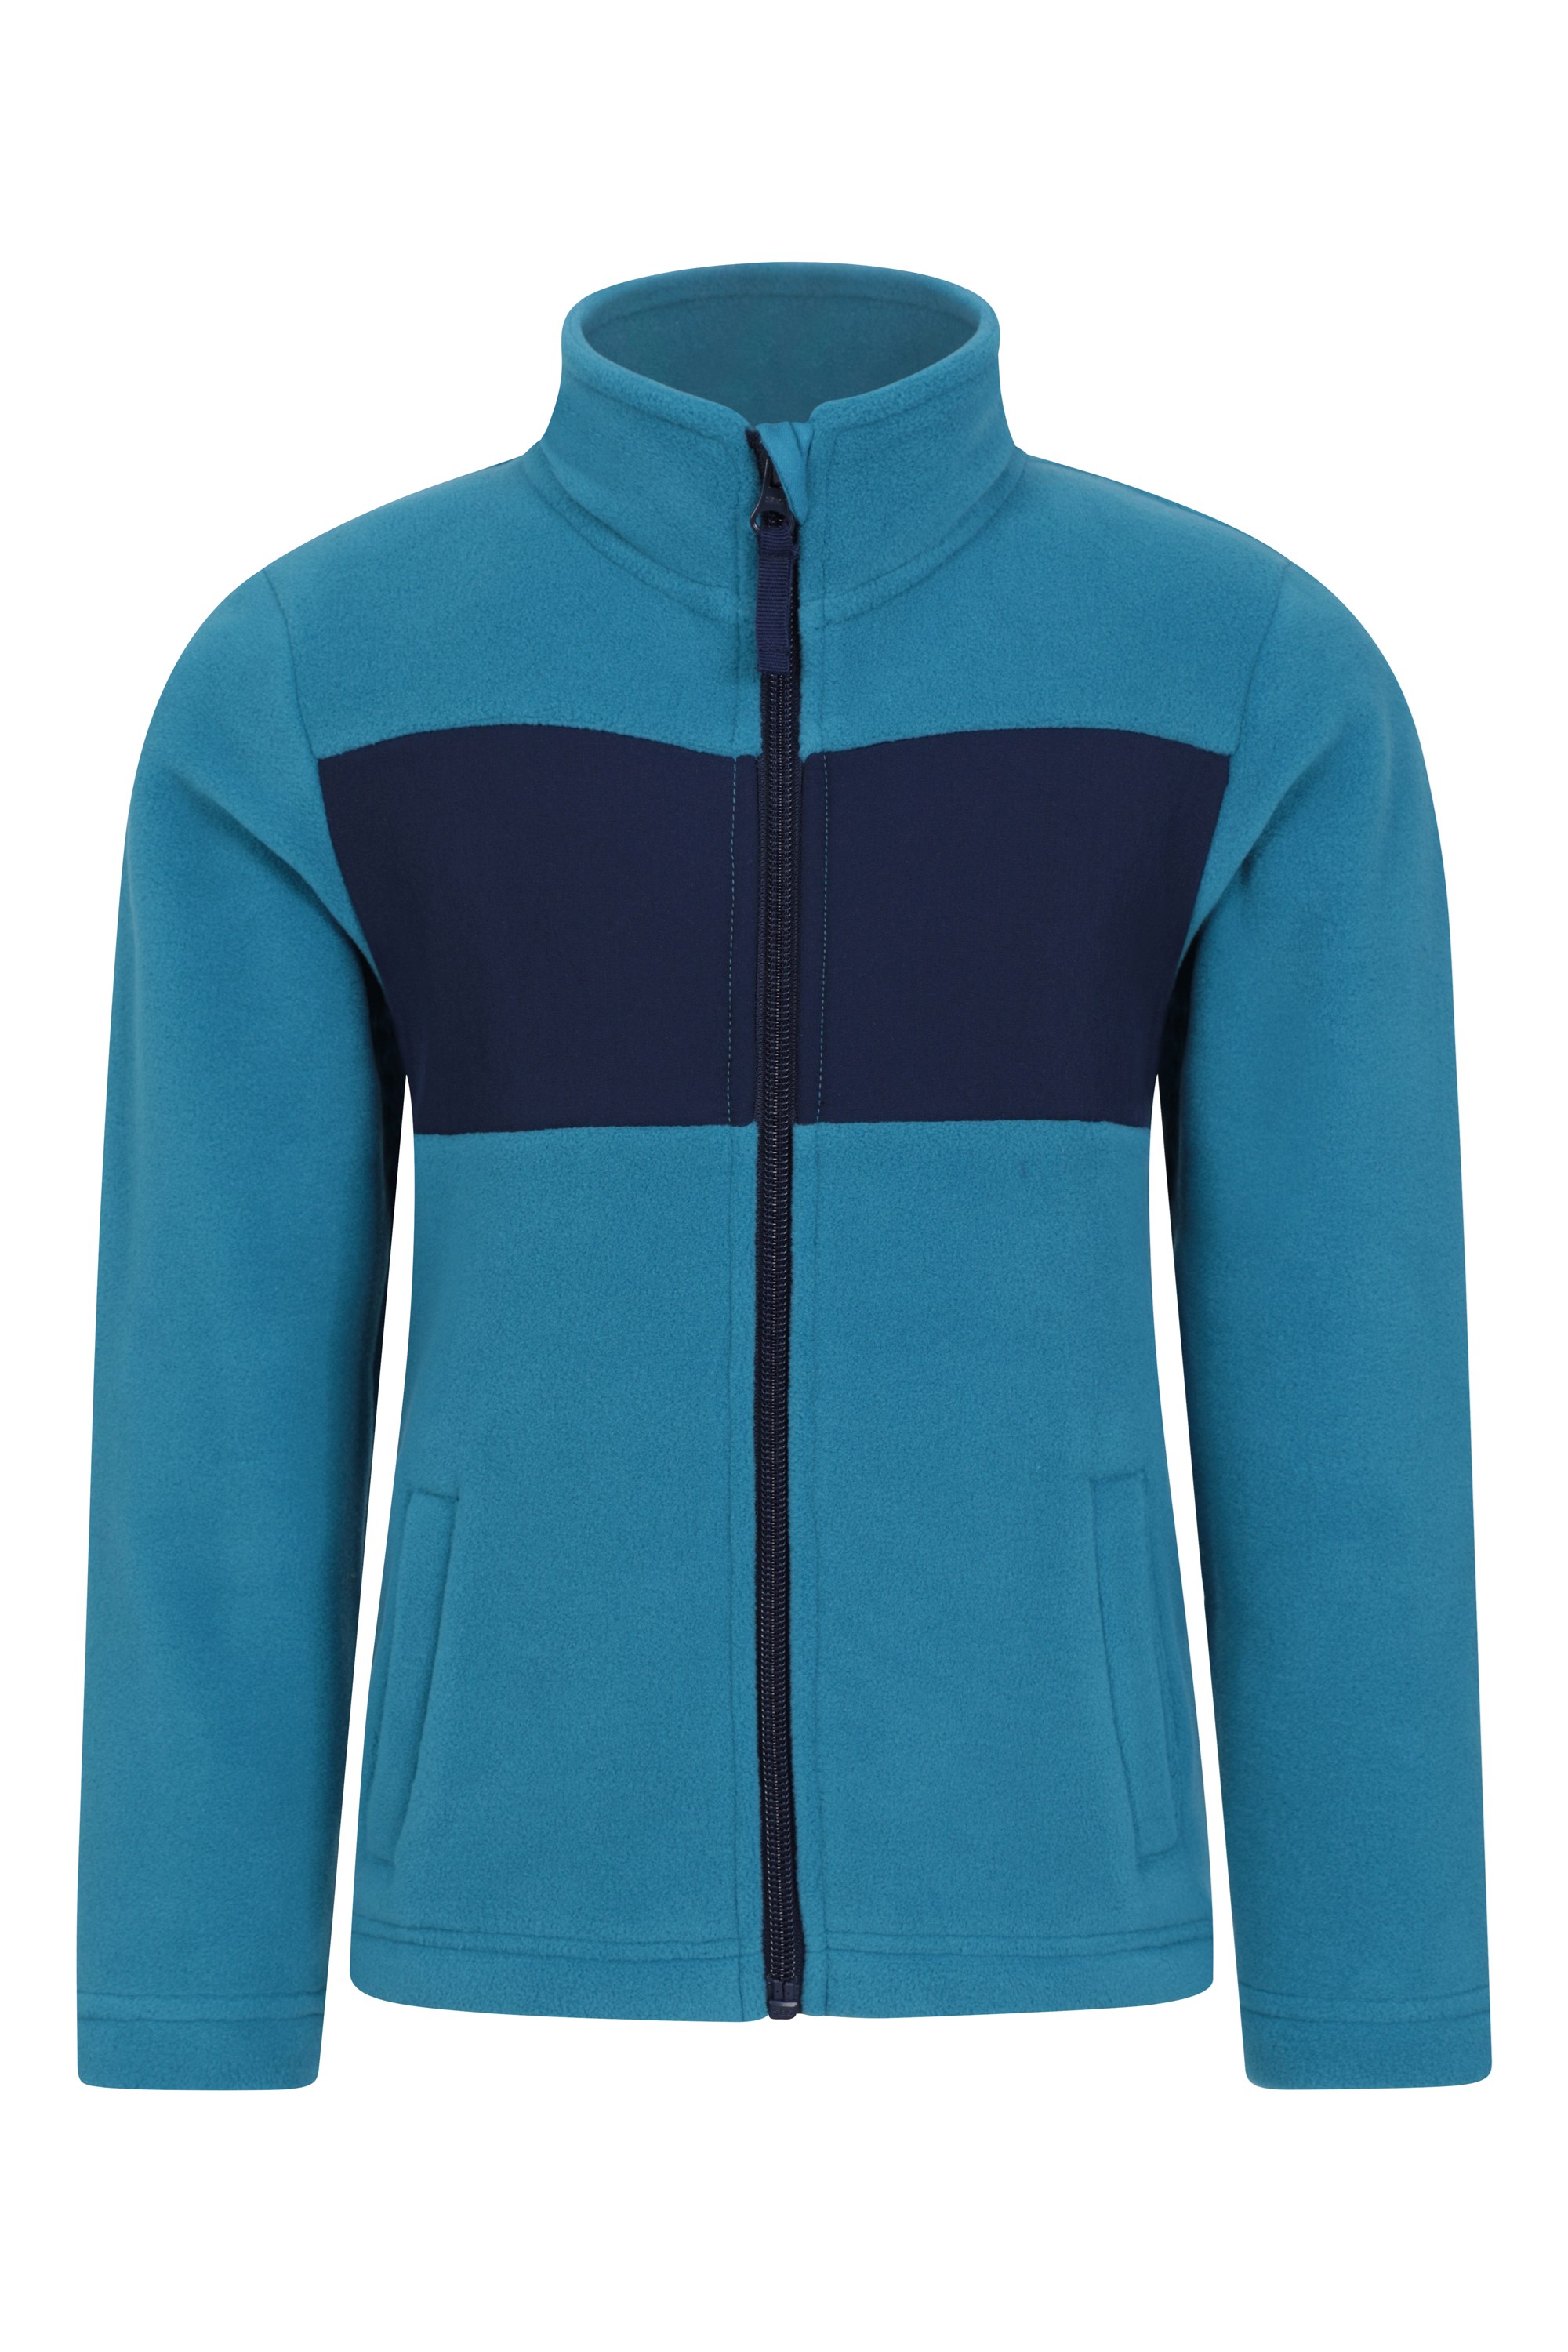 Mountain Warehouse Boys Full Zip Fitted Knit Textured Fleece with Full Zip 